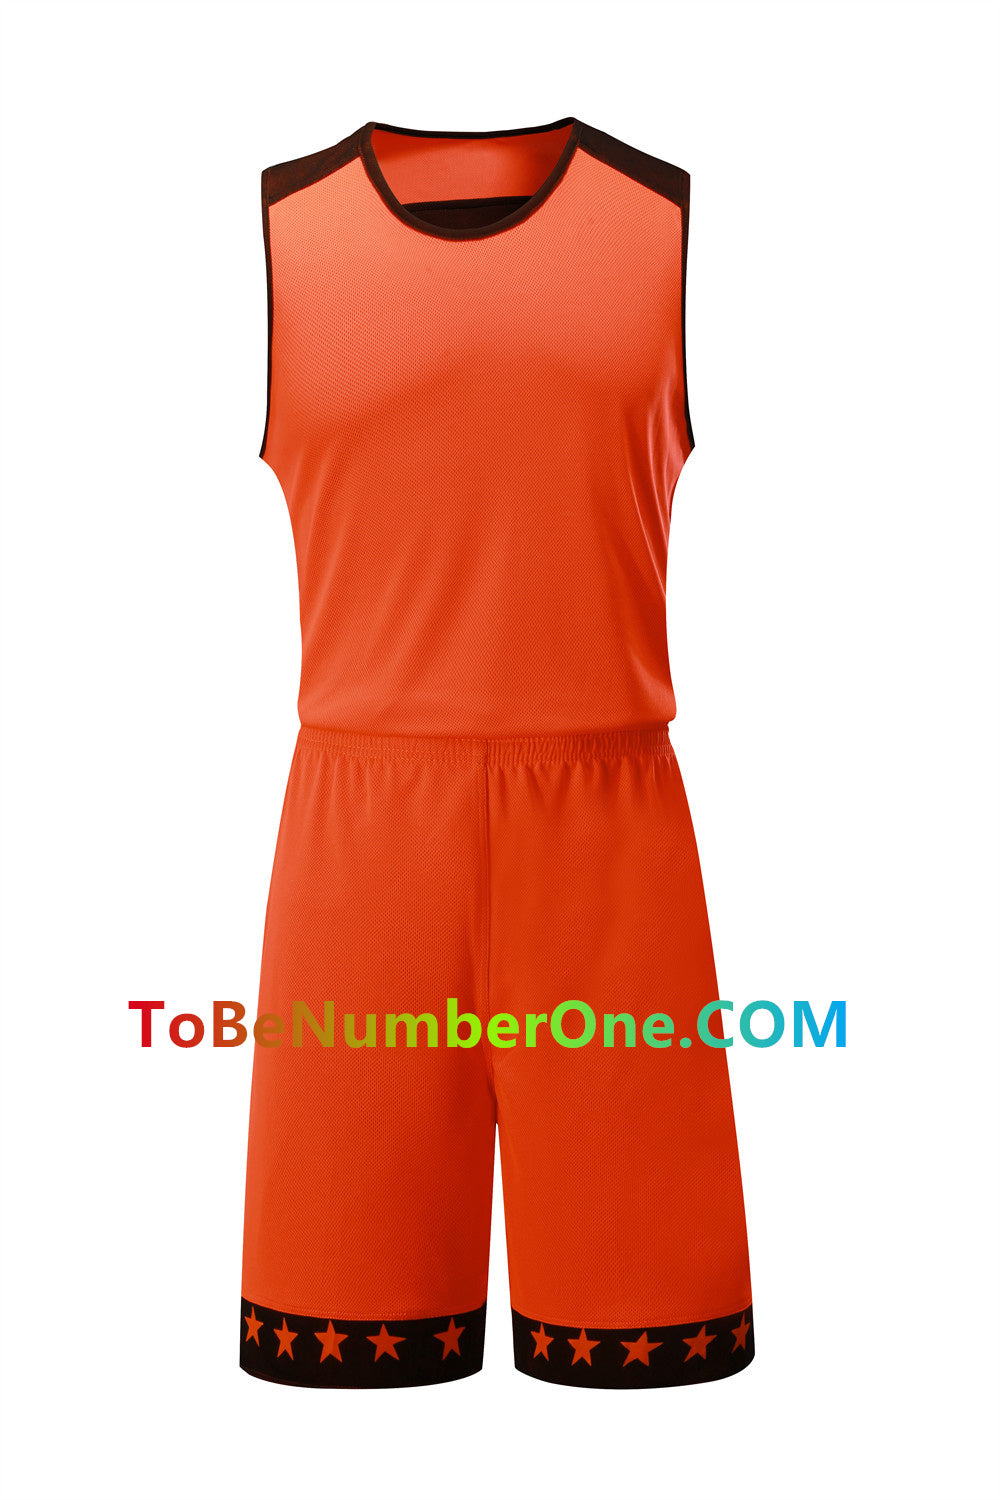 Customize instock High Quality Quick-drying basketball uniforms print with team name , player and number. basketball jerseys&shorts 910#